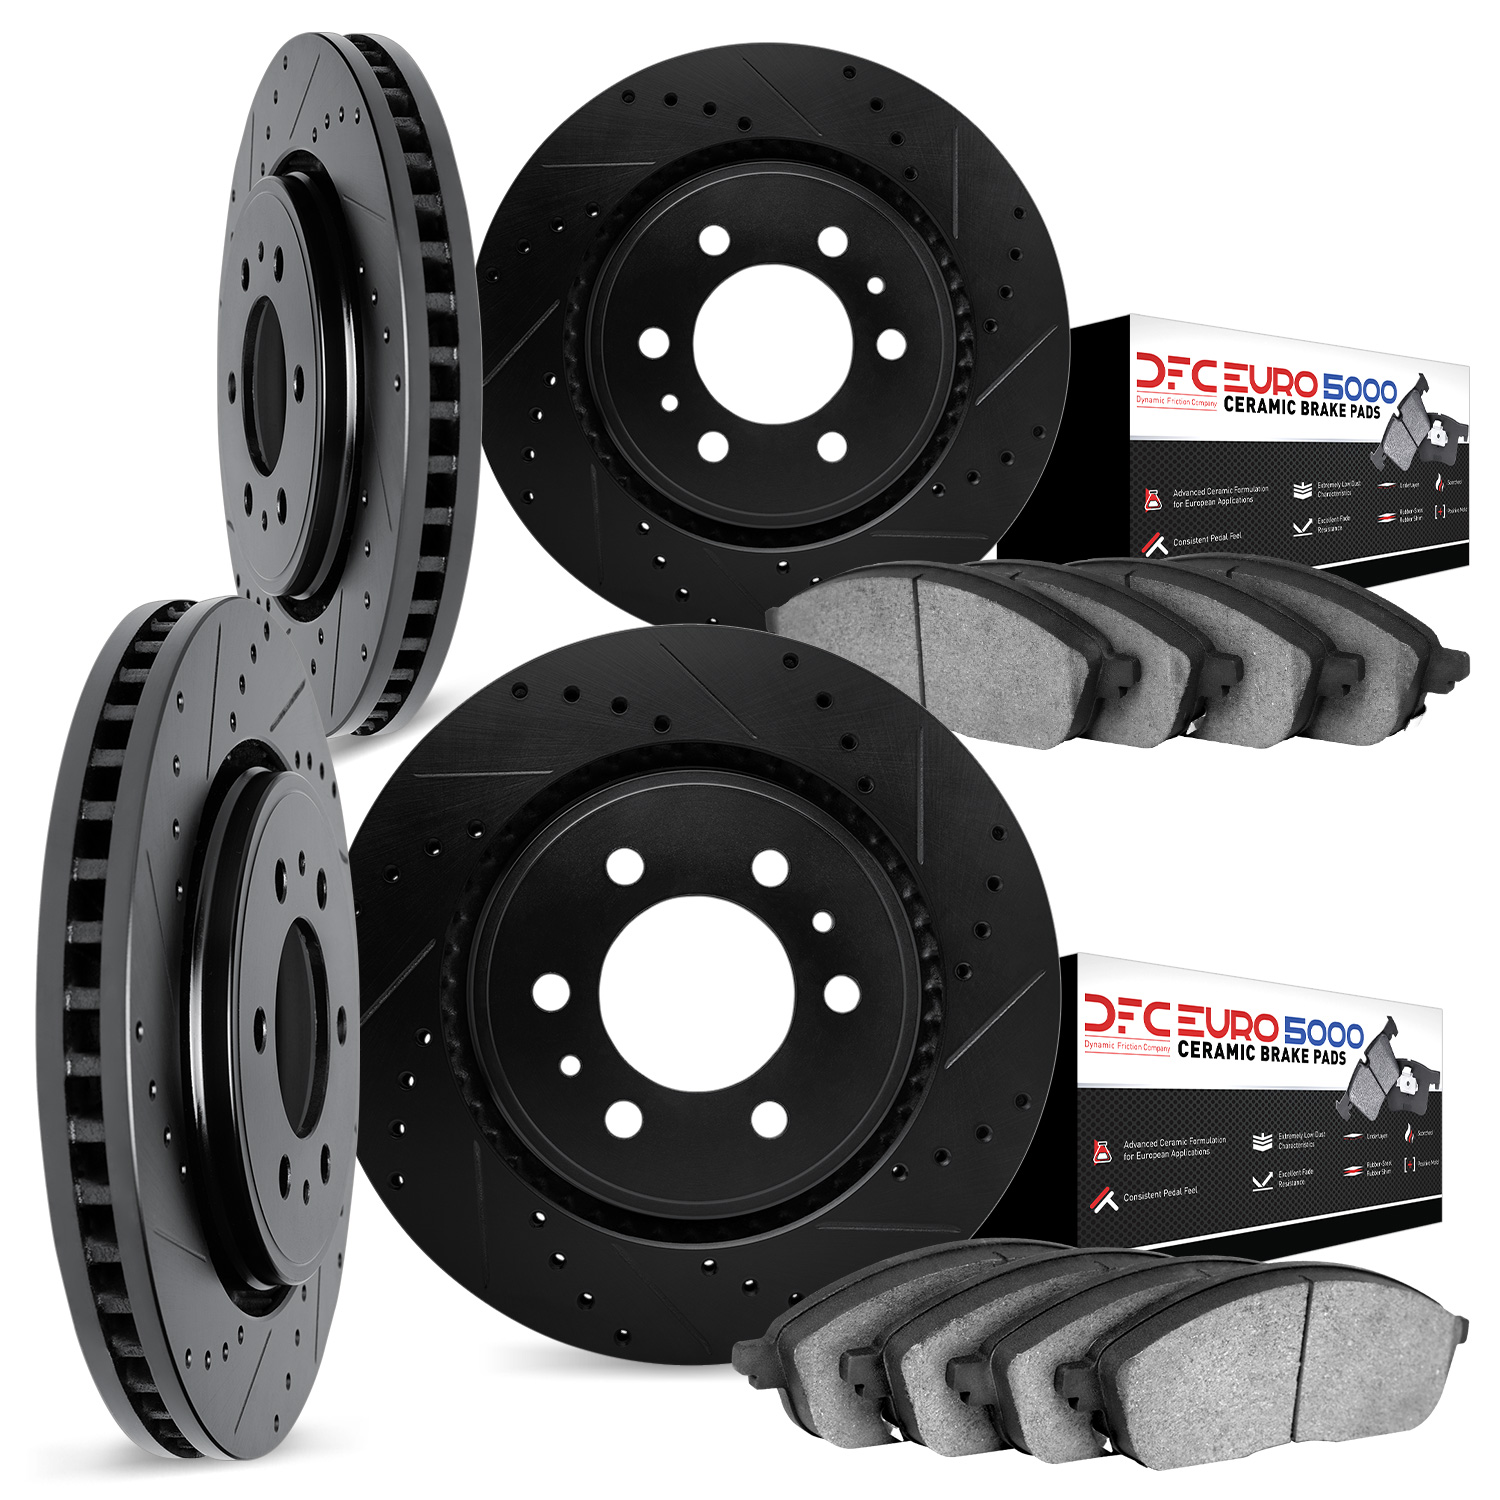 8604-46003 Drilled/Slotted Brake Rotors w/5000 Euro Ceramic Brake Pads Kit [Black], 2004-2009 GM, Position: Front and Rear